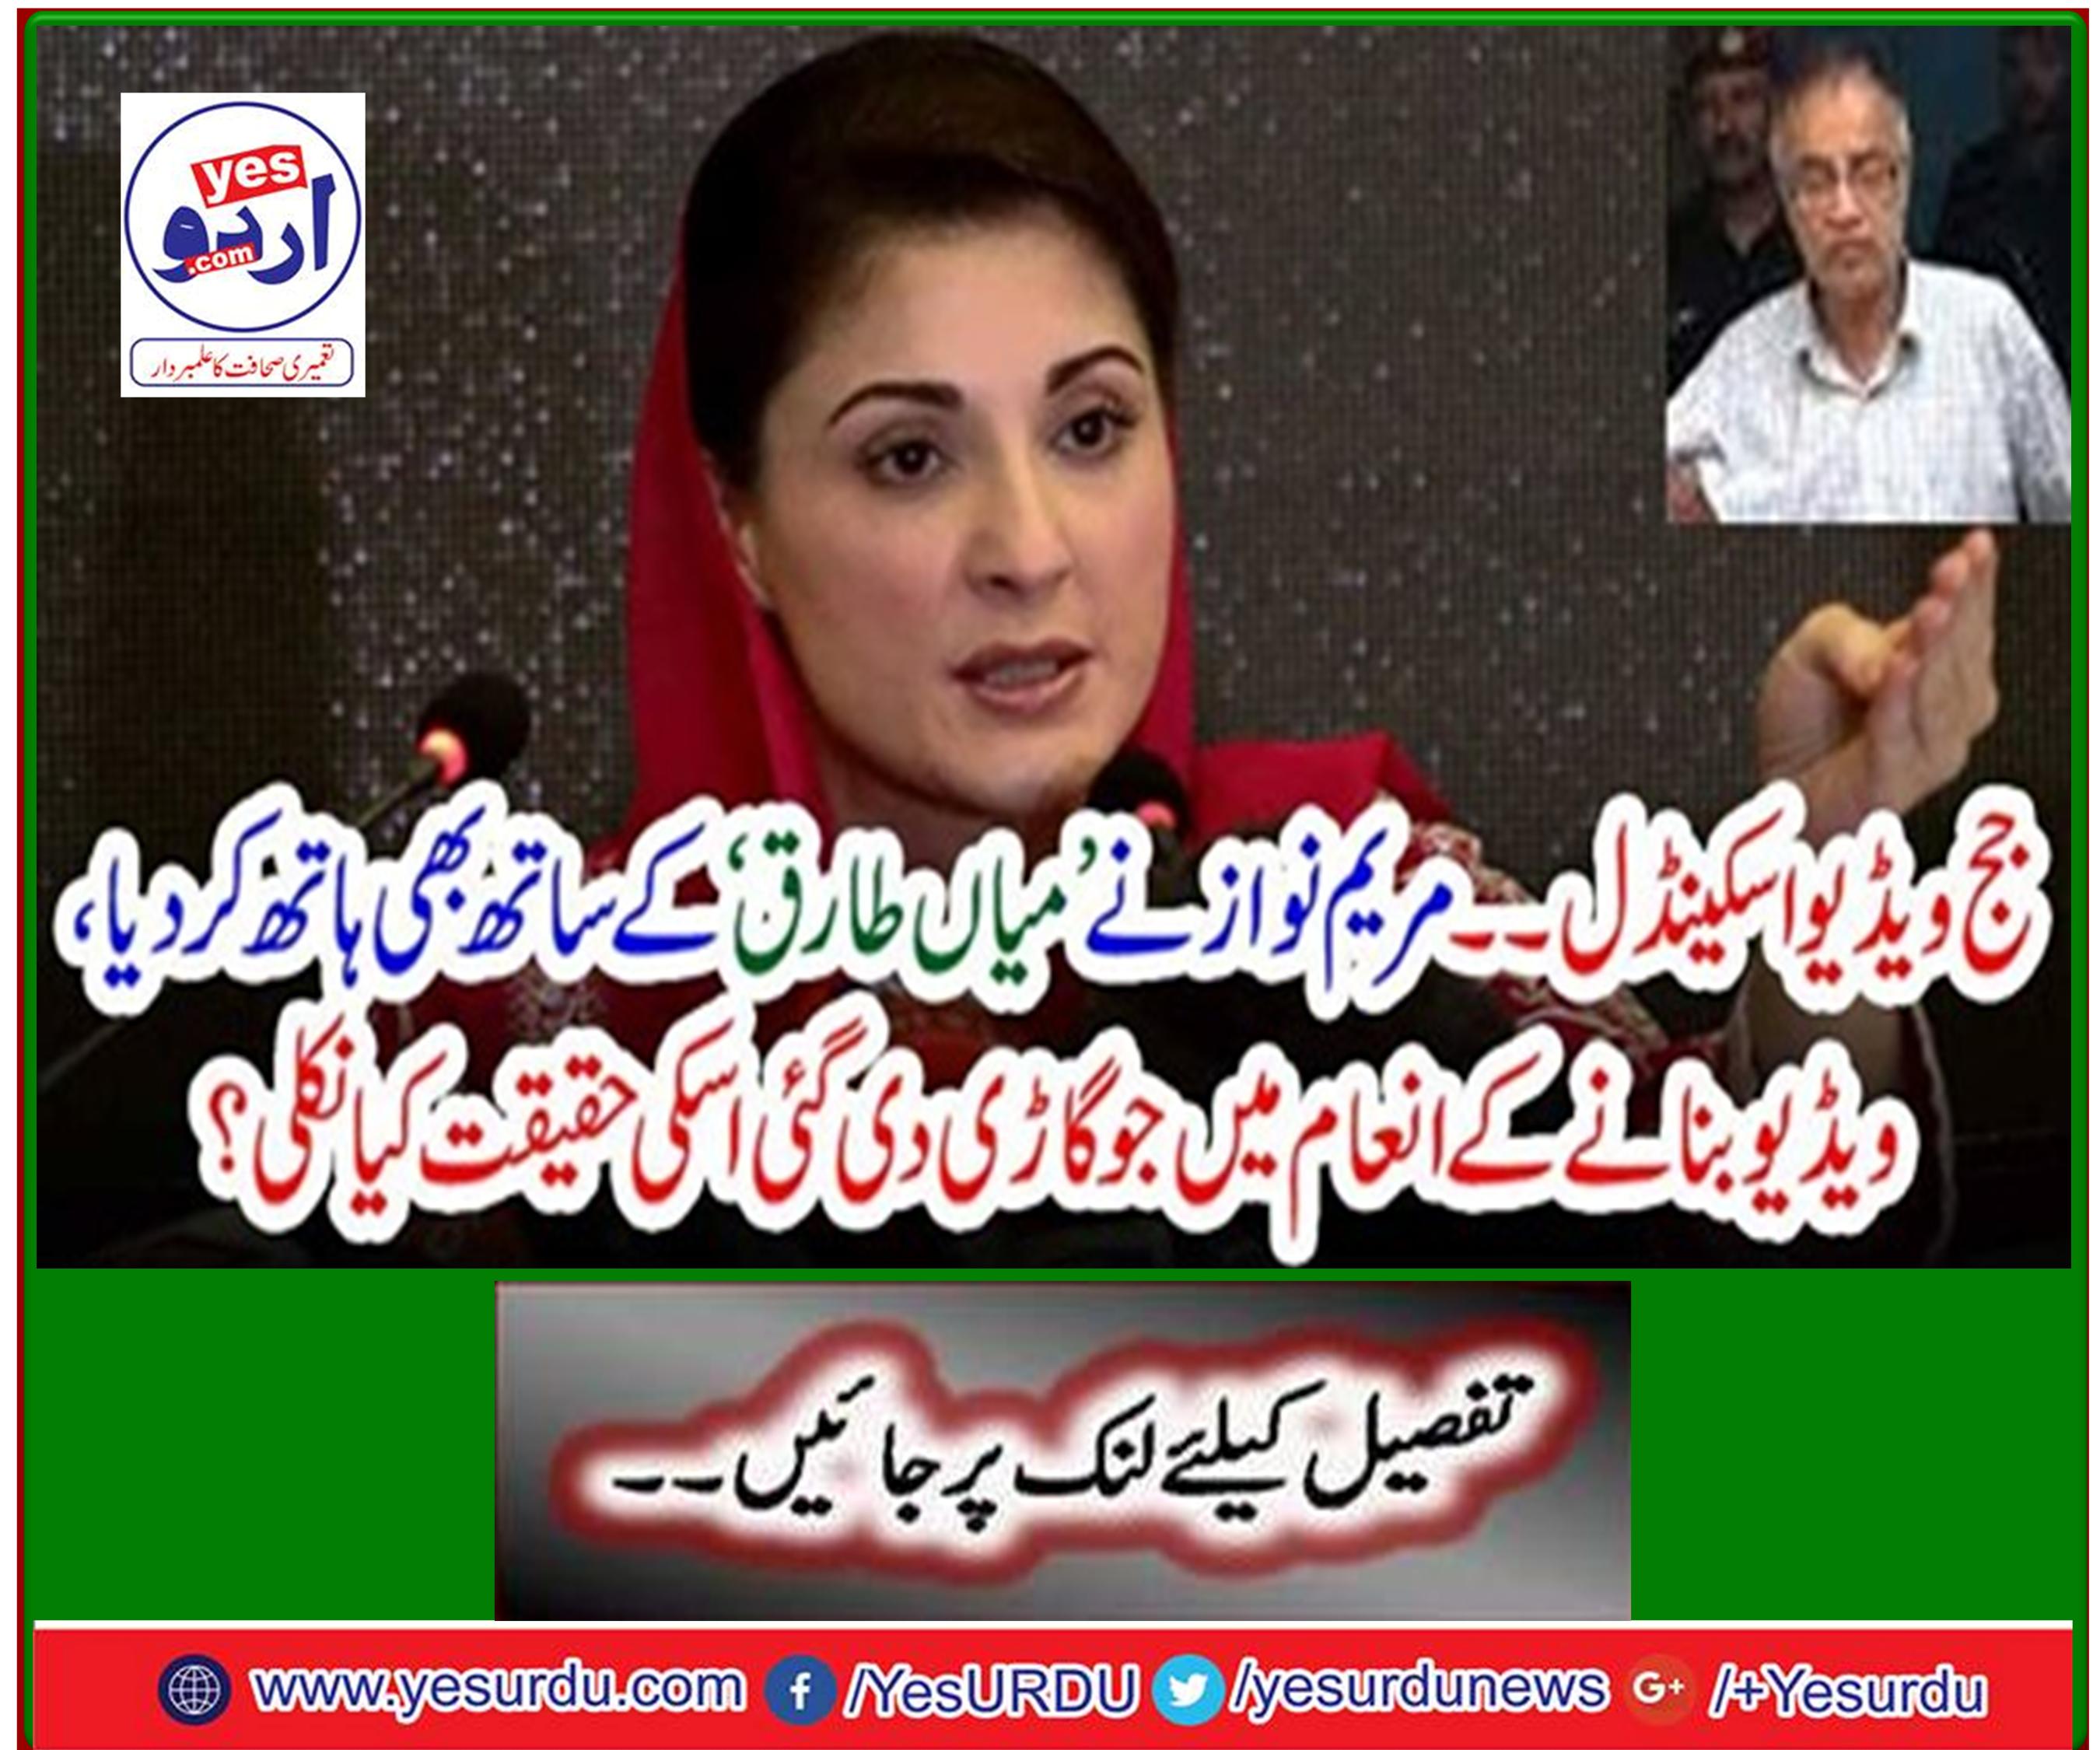 Judge Video Scandal - Maryam Nawaz also joined hands with 'Mian Tariq', what turned out to be the vehicle given in the video making award